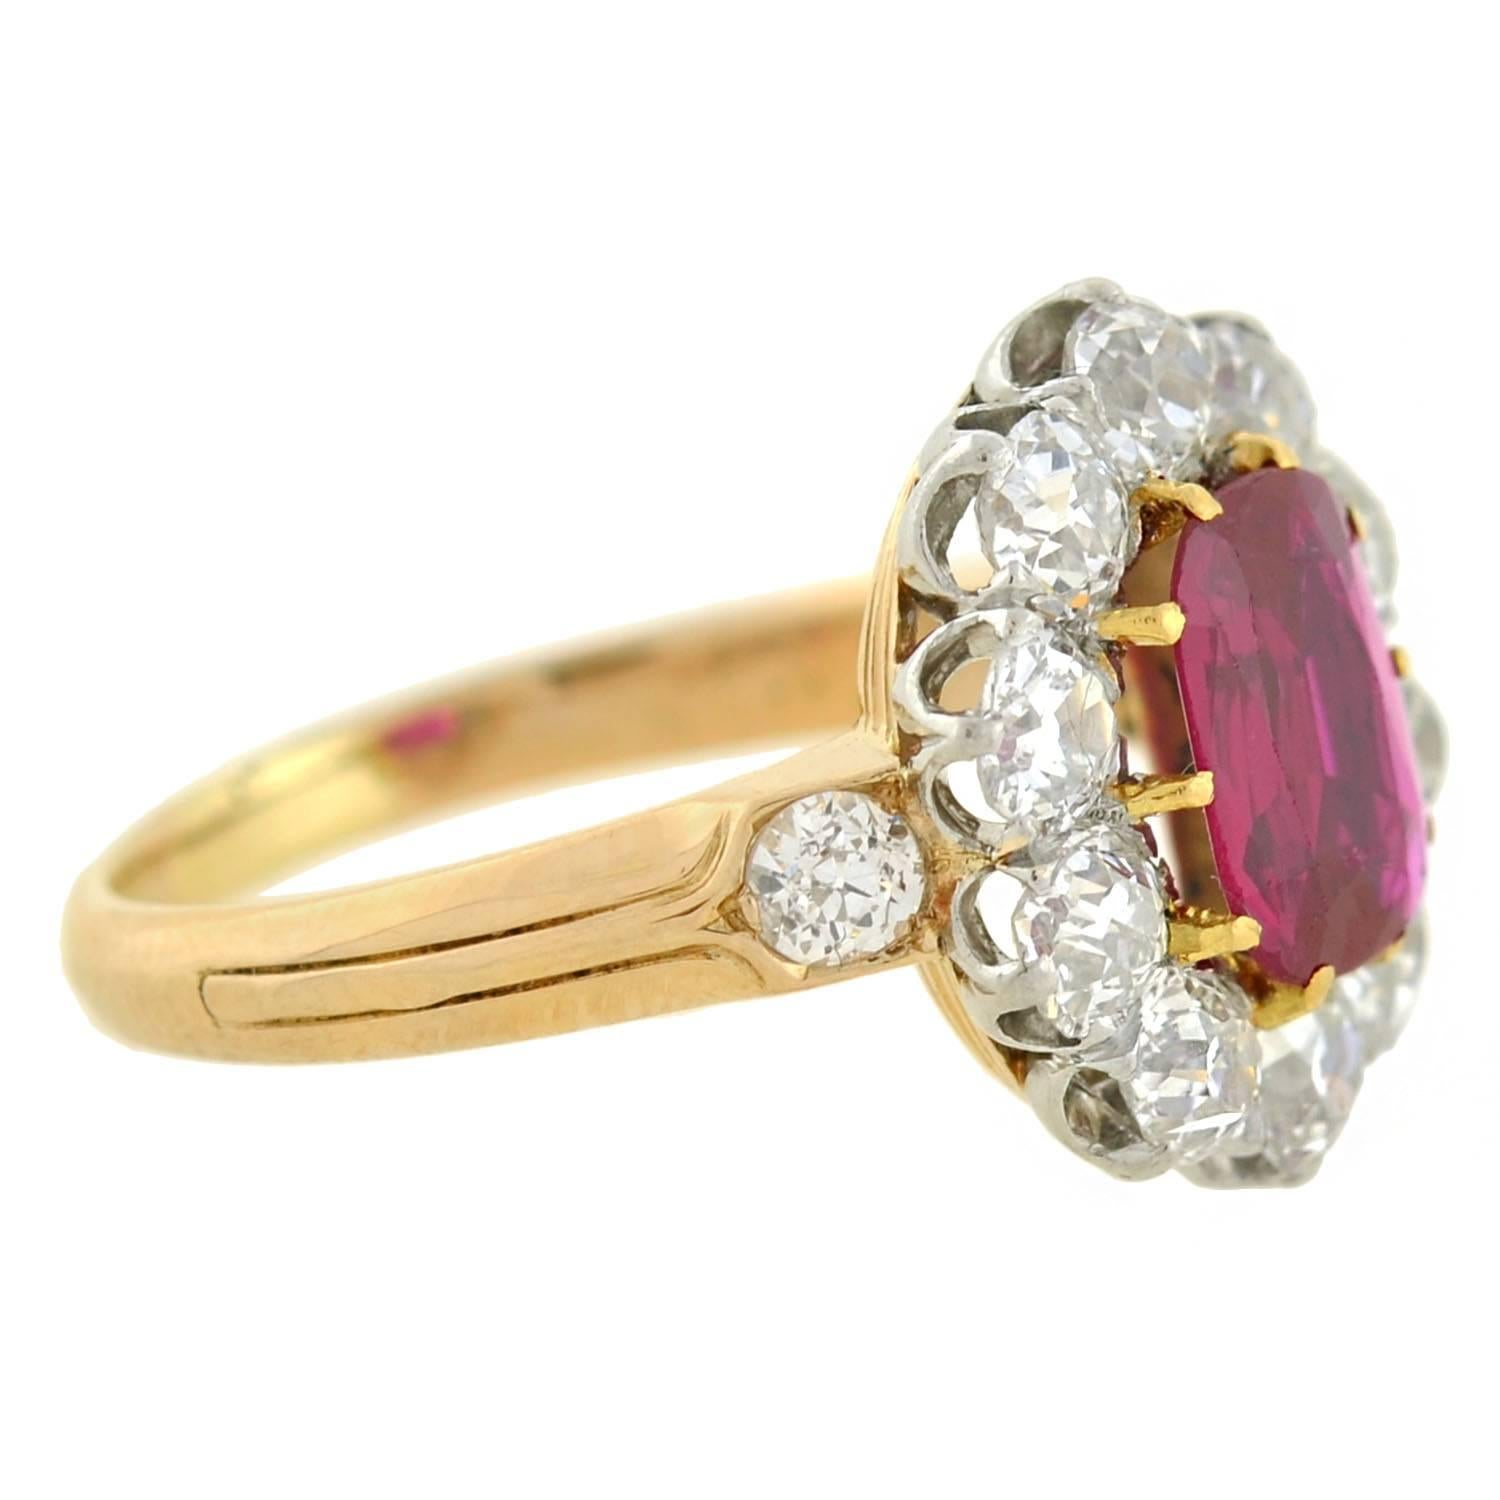 A truly spectacular ruby and diamond cluster ring from the Edwardian (ca1910) era! This outstanding ring is crafted in vibrant 18kt gold with a platinum top. Prong set at the center is a gorgeous Burma ruby, which is a Cushion Mixed Cut weighing